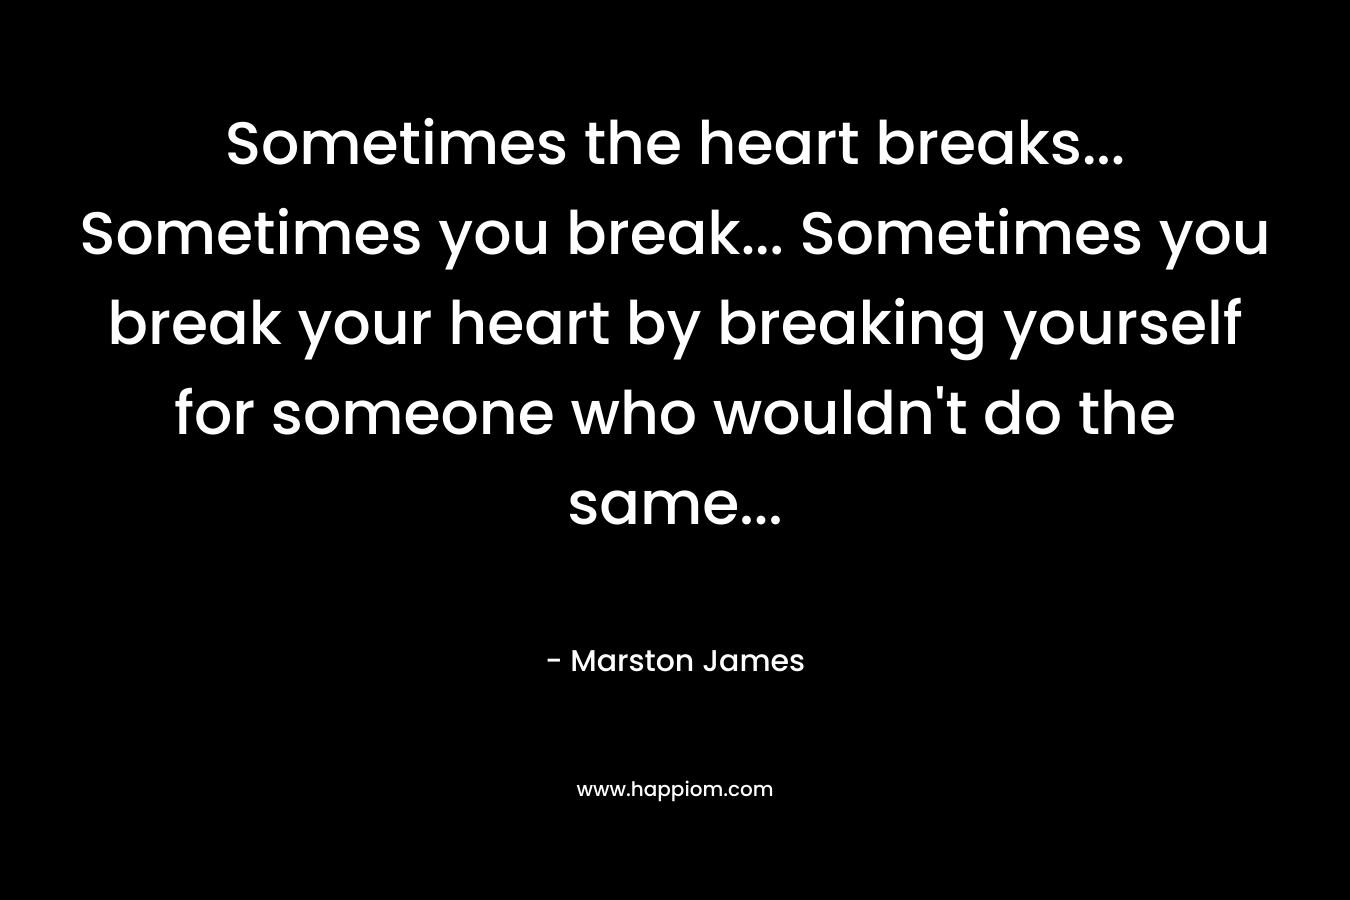 Sometimes the heart breaks... Sometimes you break... Sometimes you break your heart by breaking yourself for someone who wouldn't do the same...